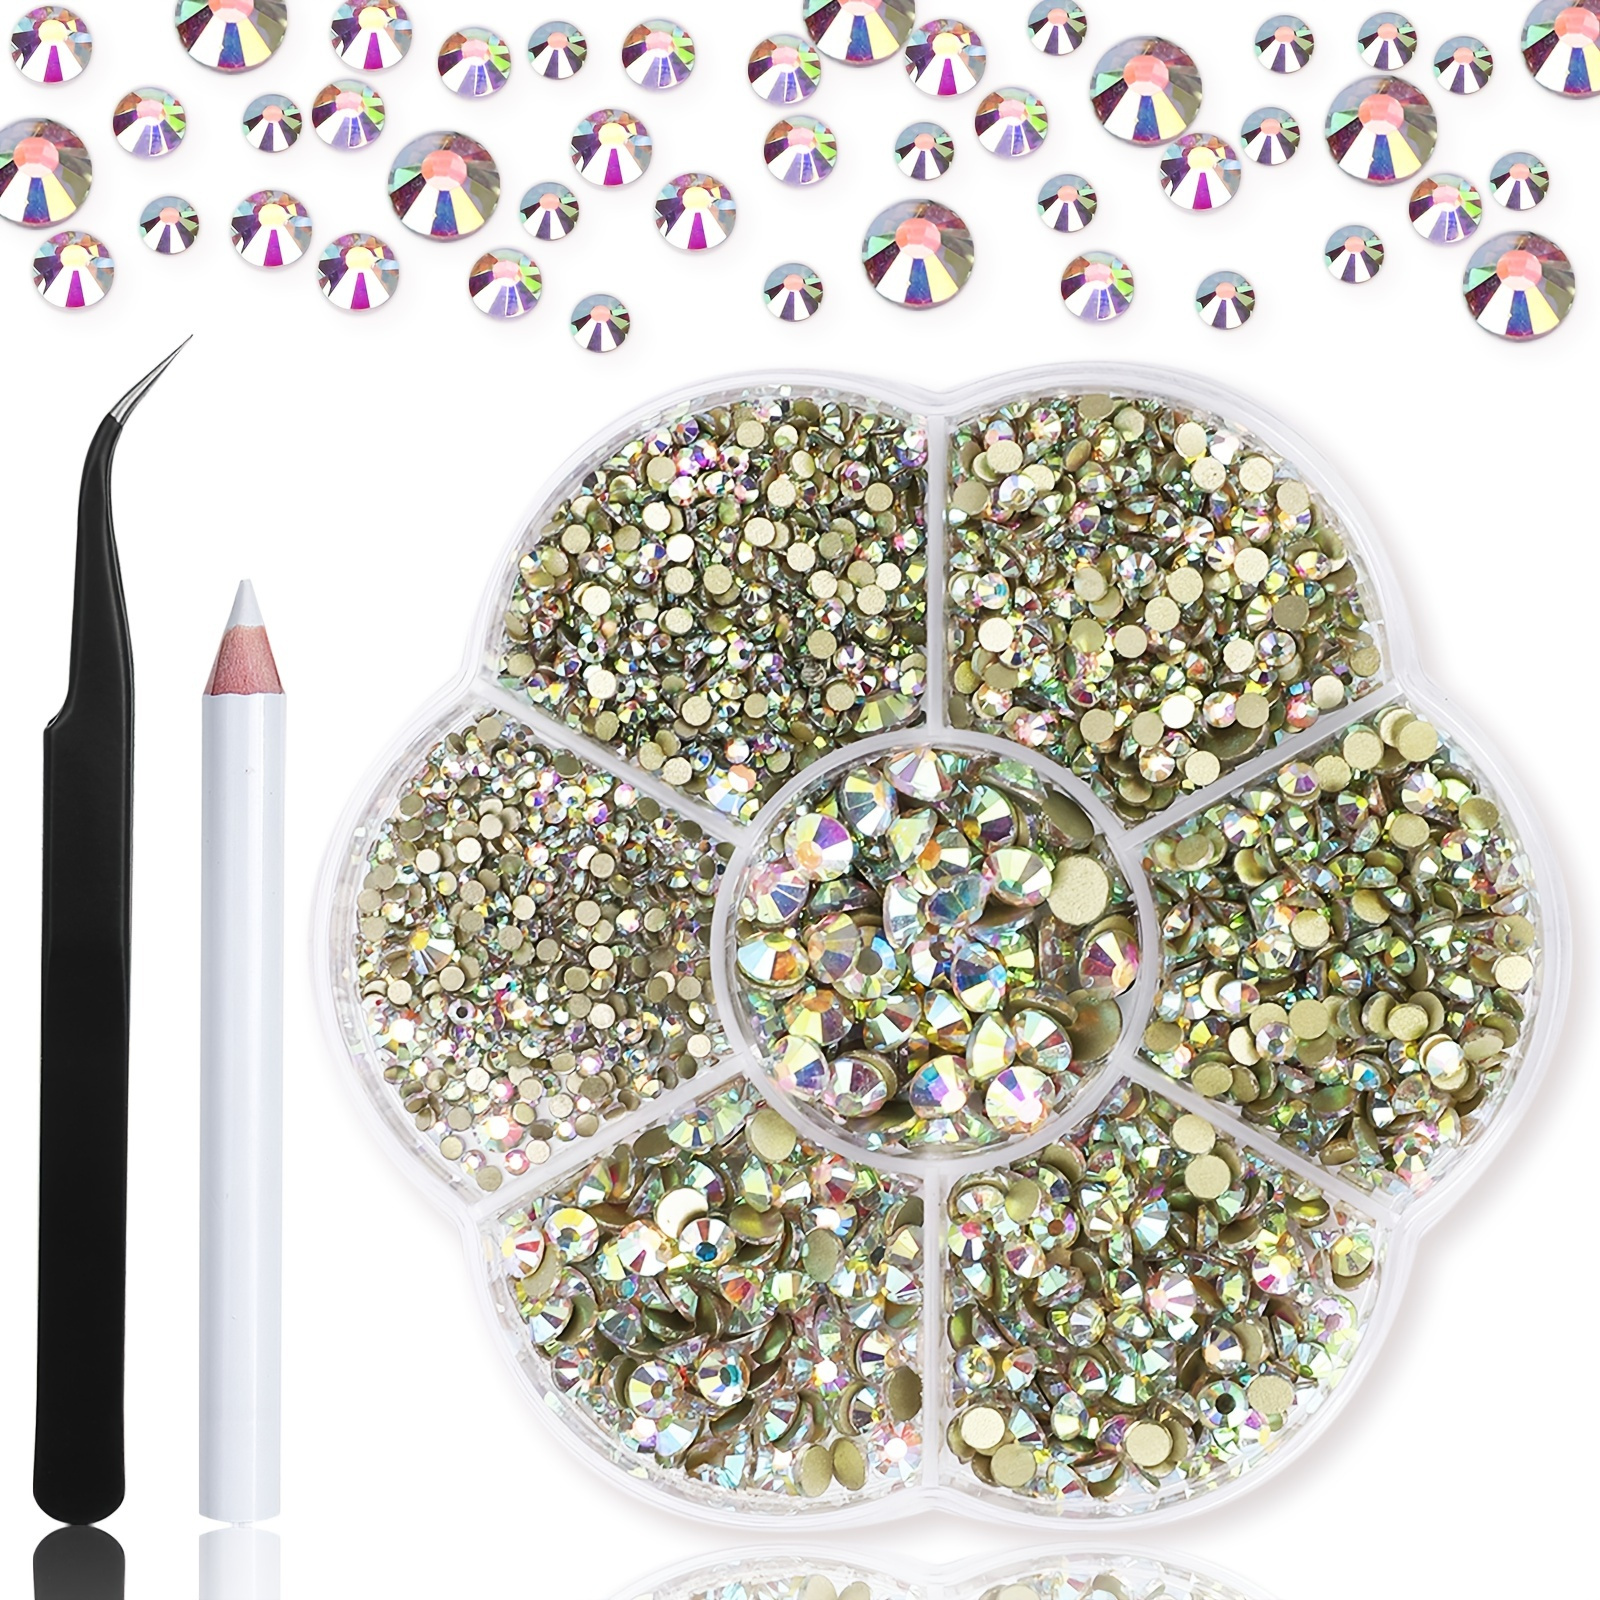  Queenme 2mm Small Rhinestones for Nails Flat Back Glass Nail  Crystals for Crafts Eye Makeup, Round Flatback Stones Shiny No Dull Gems  Sparkly Diamond SS6 2880pcs : Beauty & Personal Care